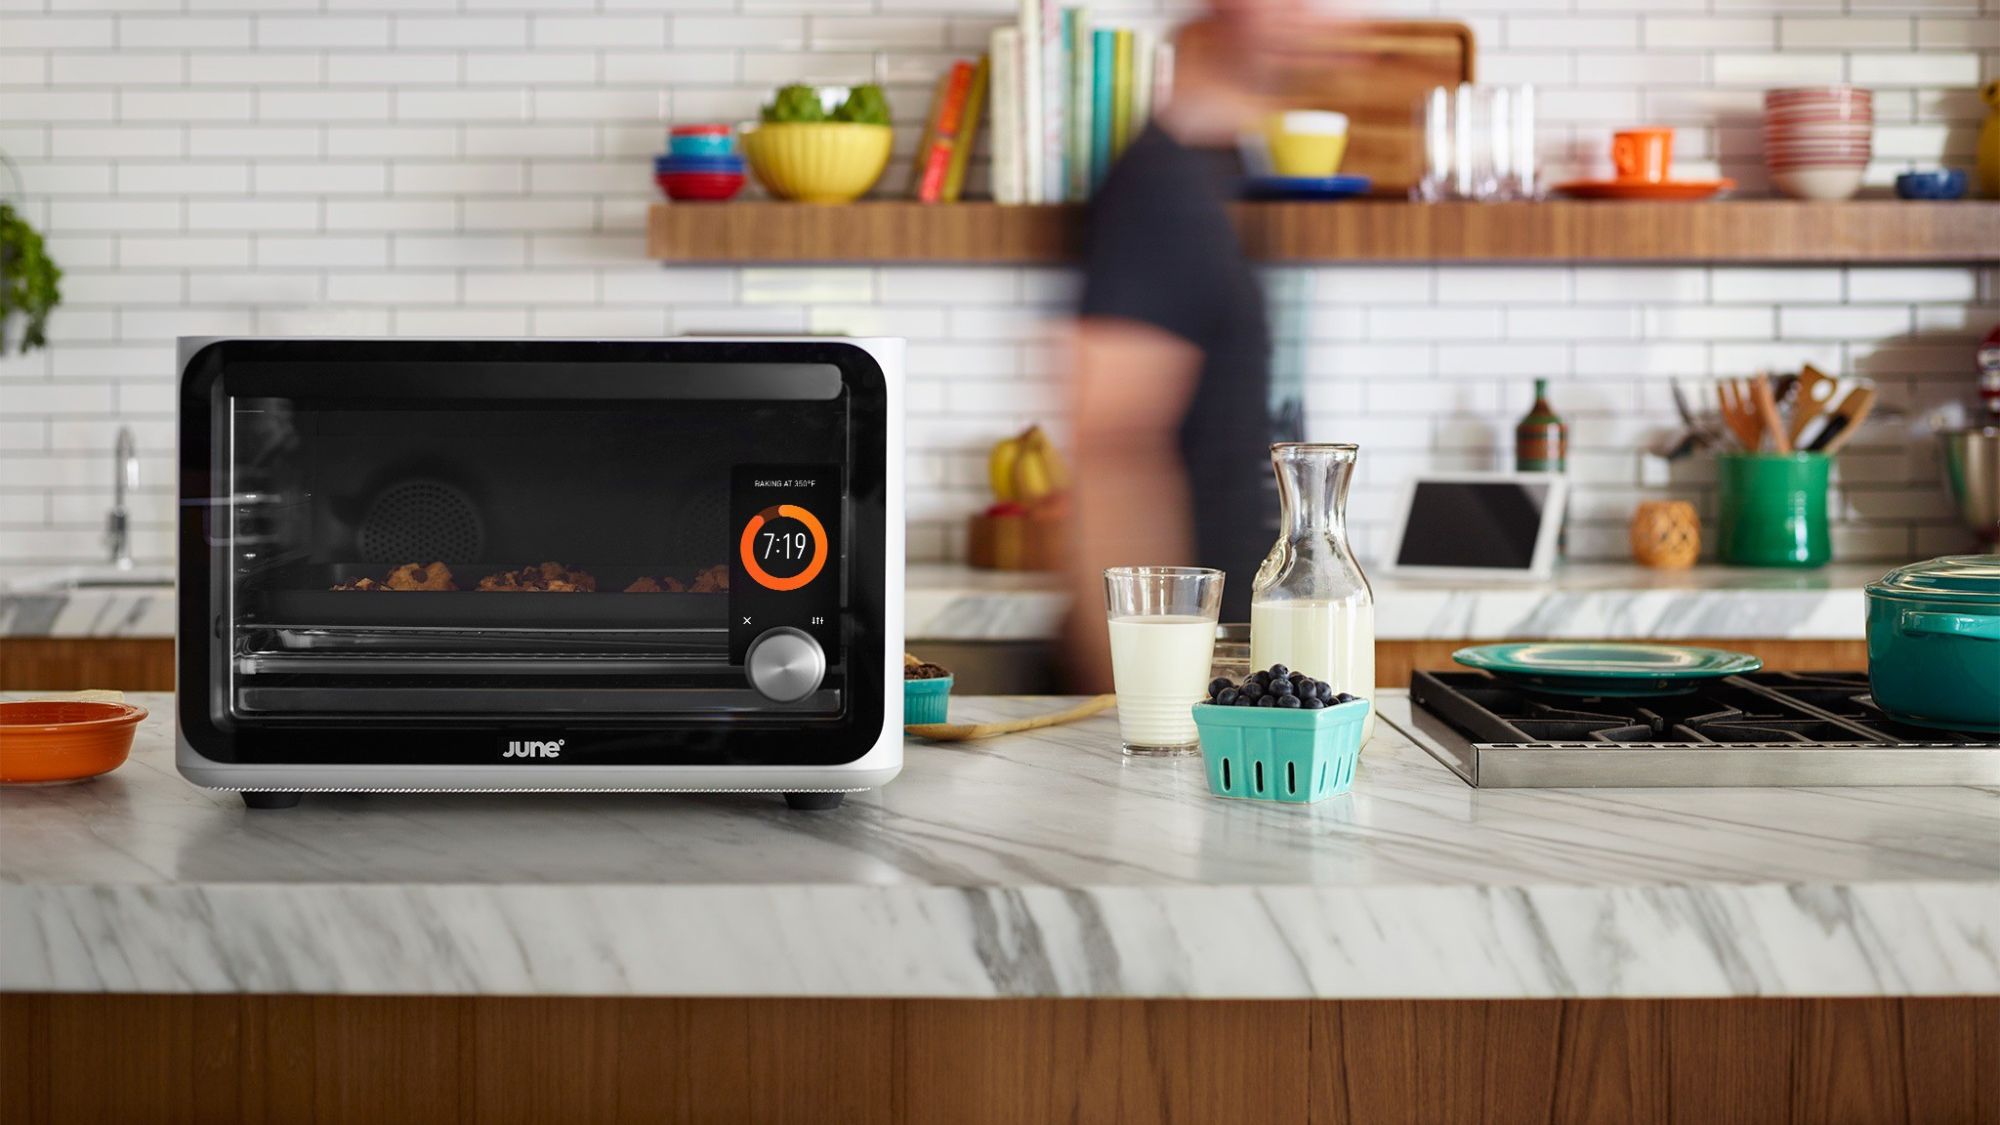 June is an app-controlled "Smart Oven"